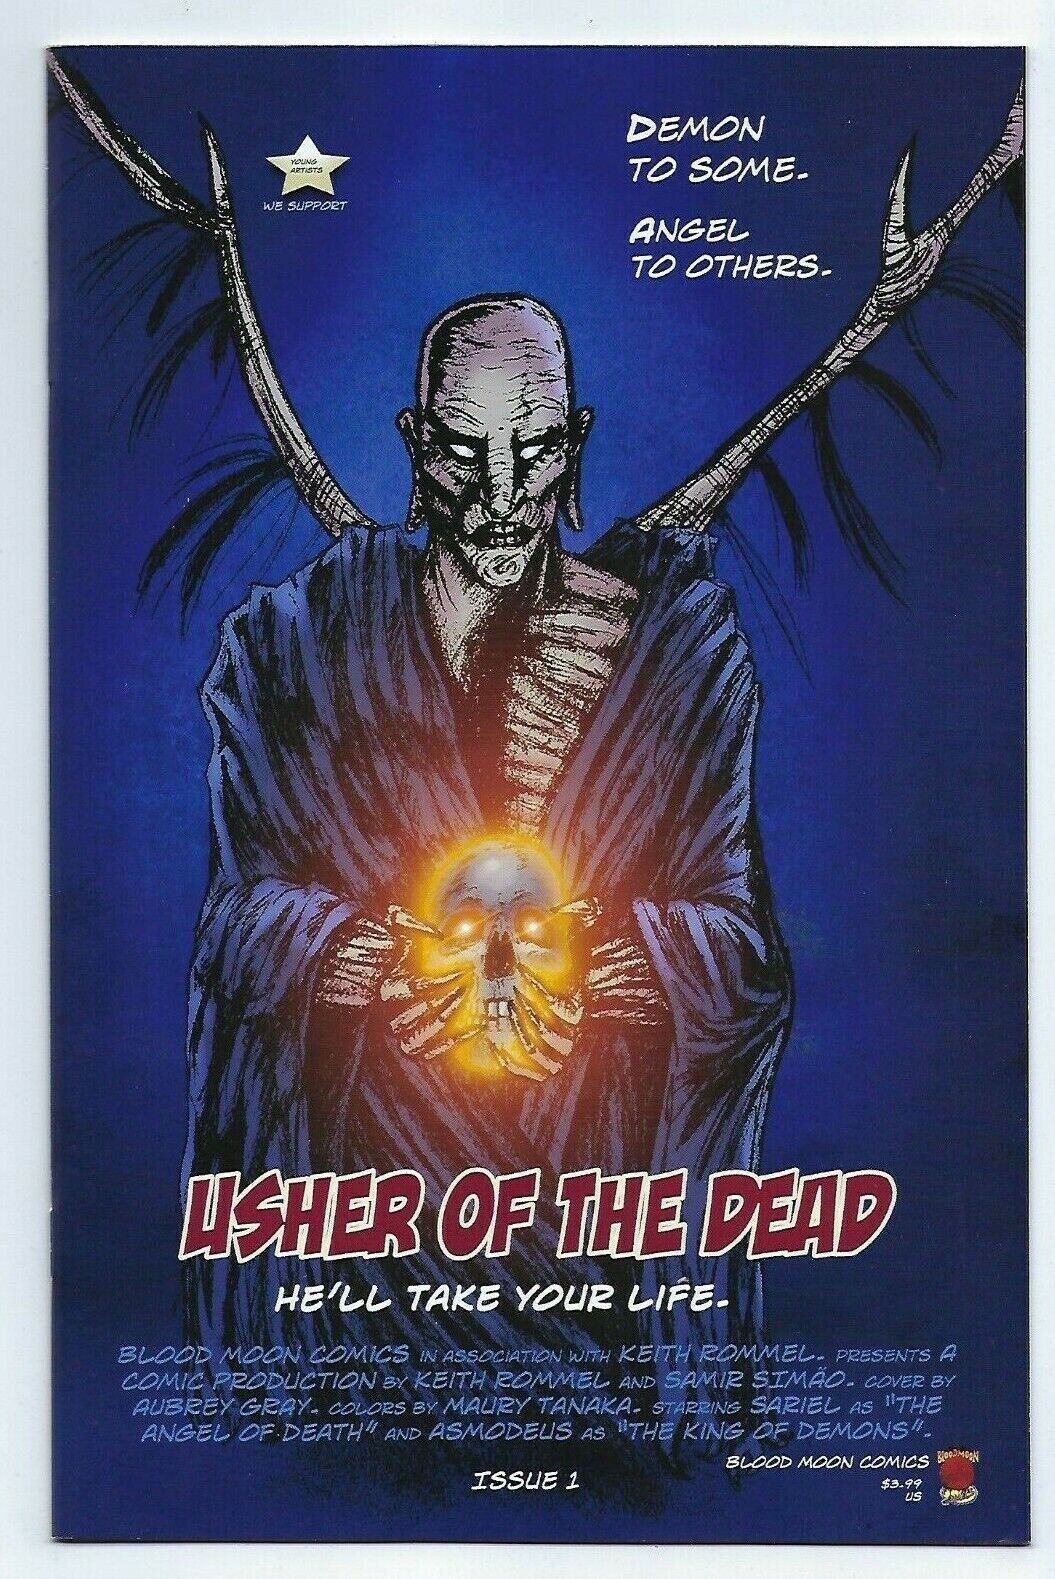 Blood Moon Comics USHER OF THE DEAD #1 first printing cover B